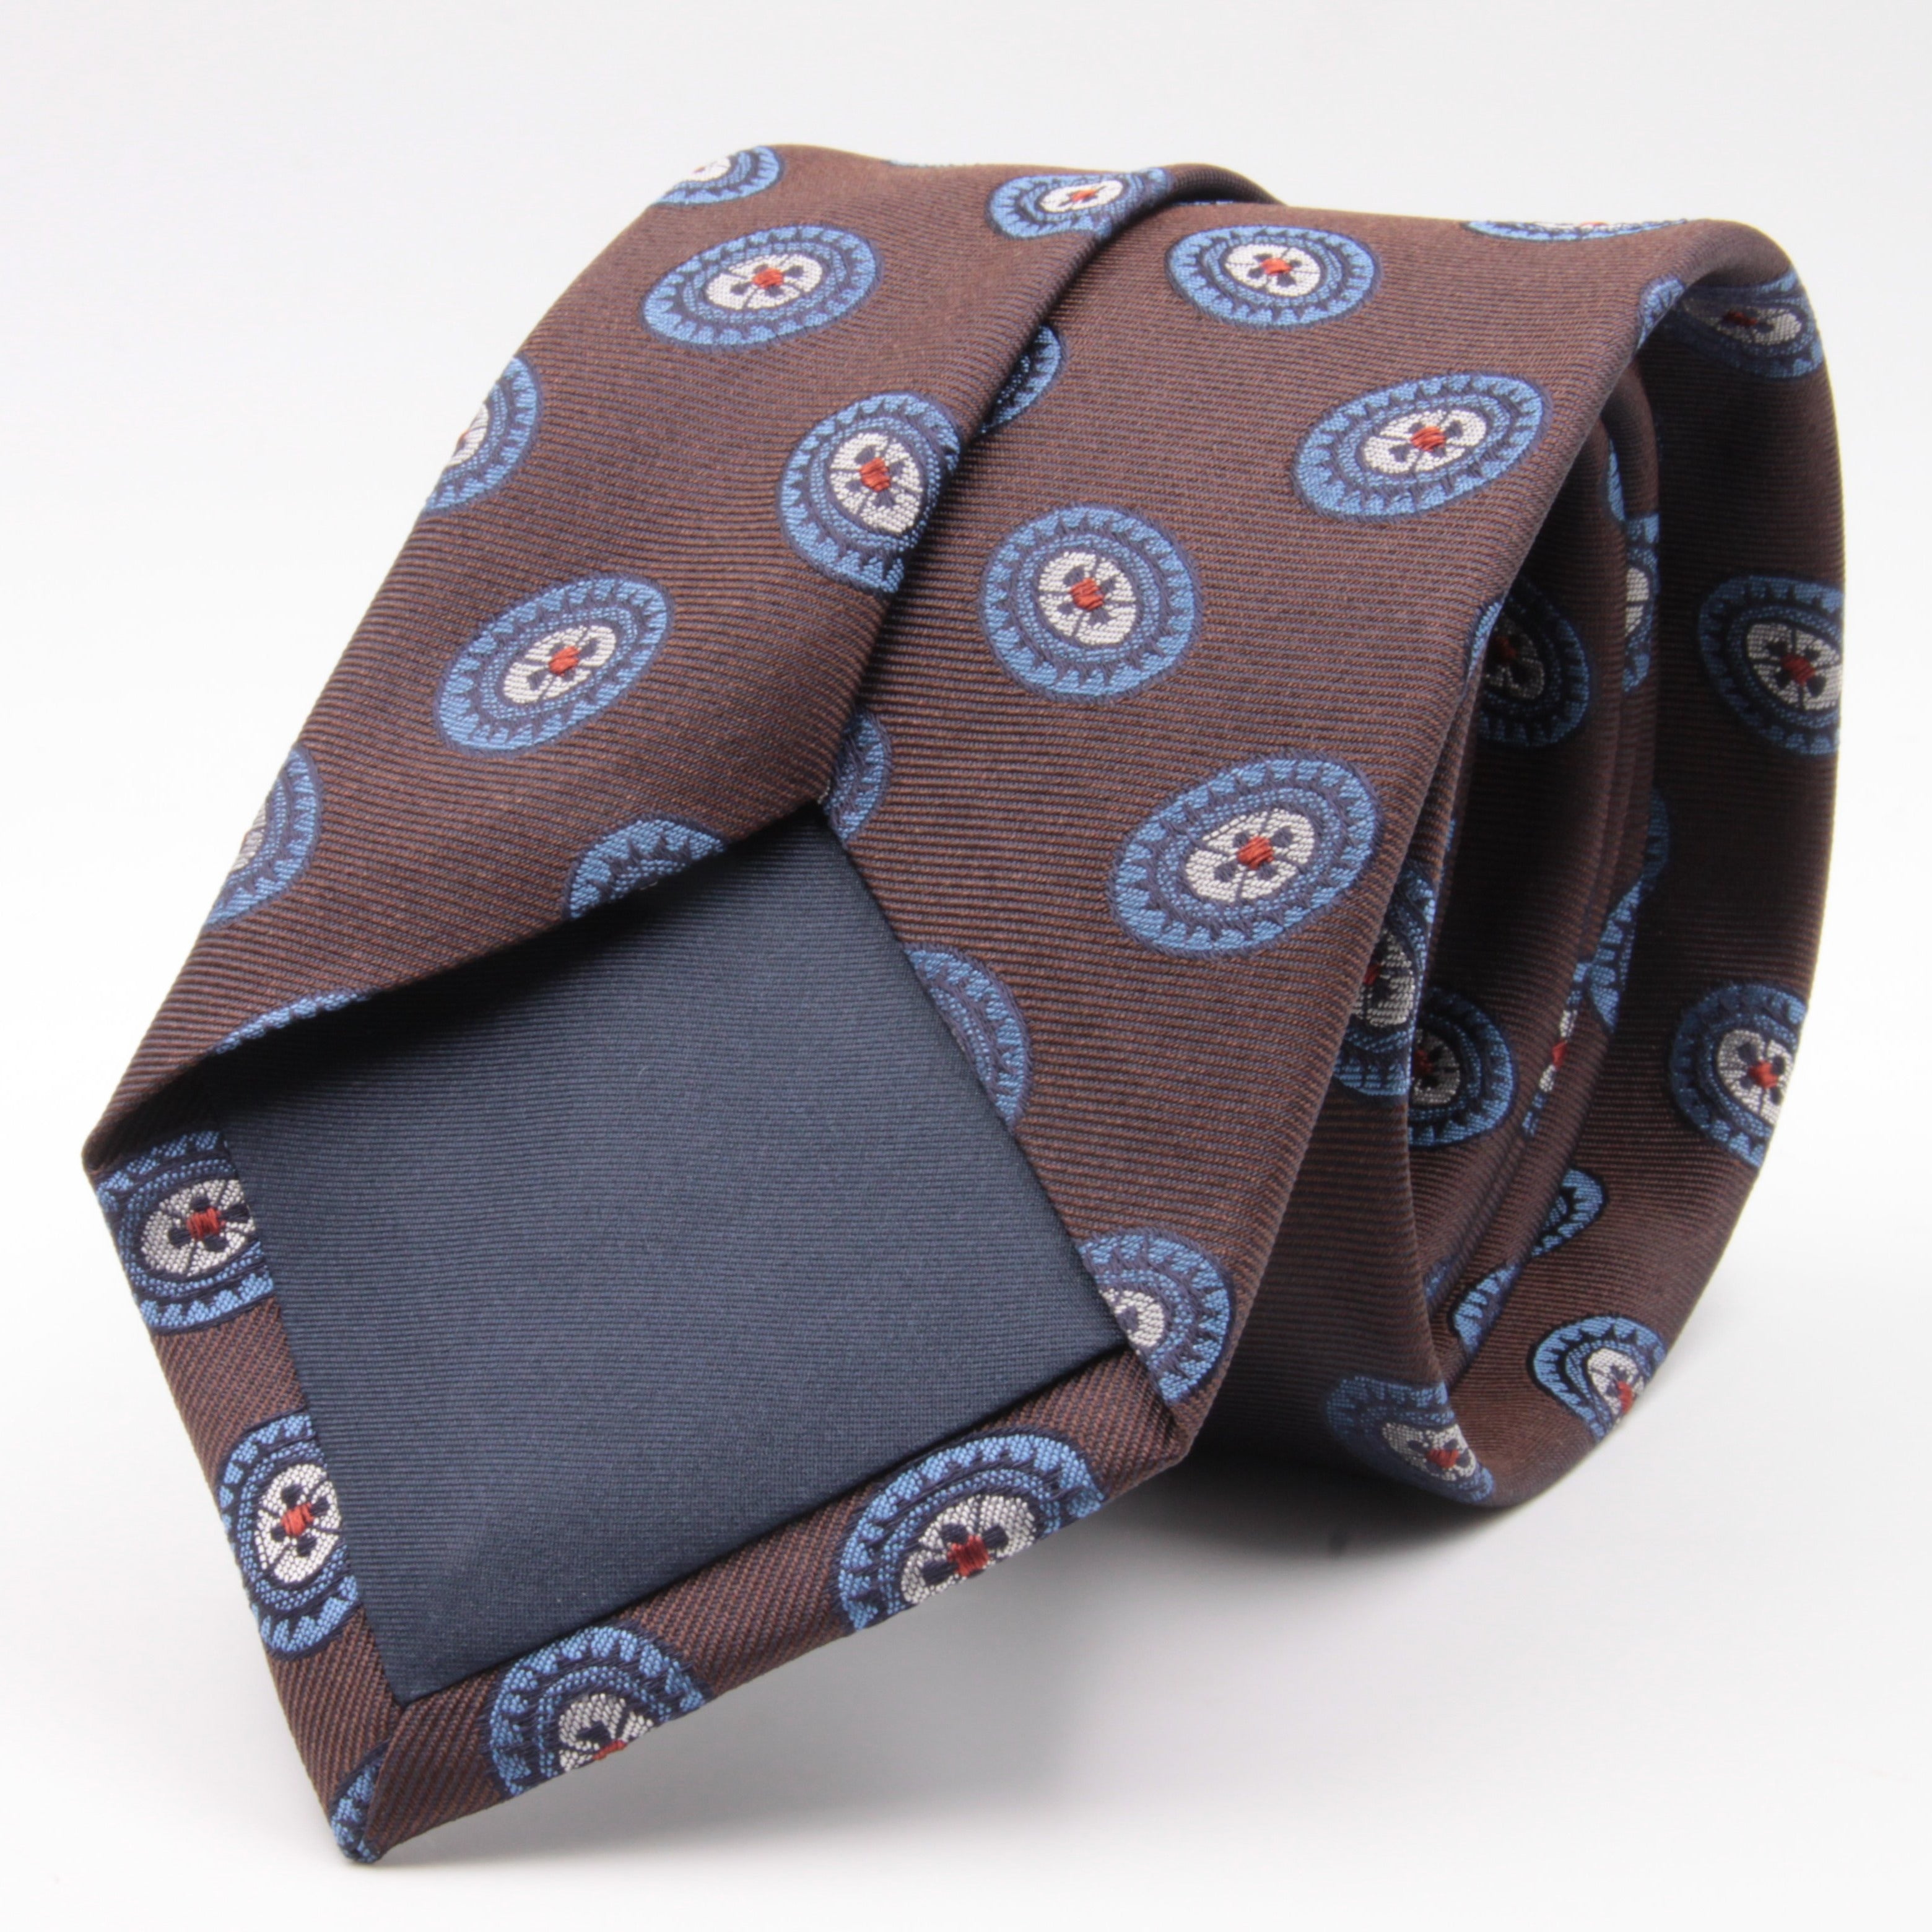 Cruciani & Bella 100% Silk Jacquard  Brown, Light Blue, Red and White Medallions Tie Handmade in Italy 8 cm x 150 cm #3780